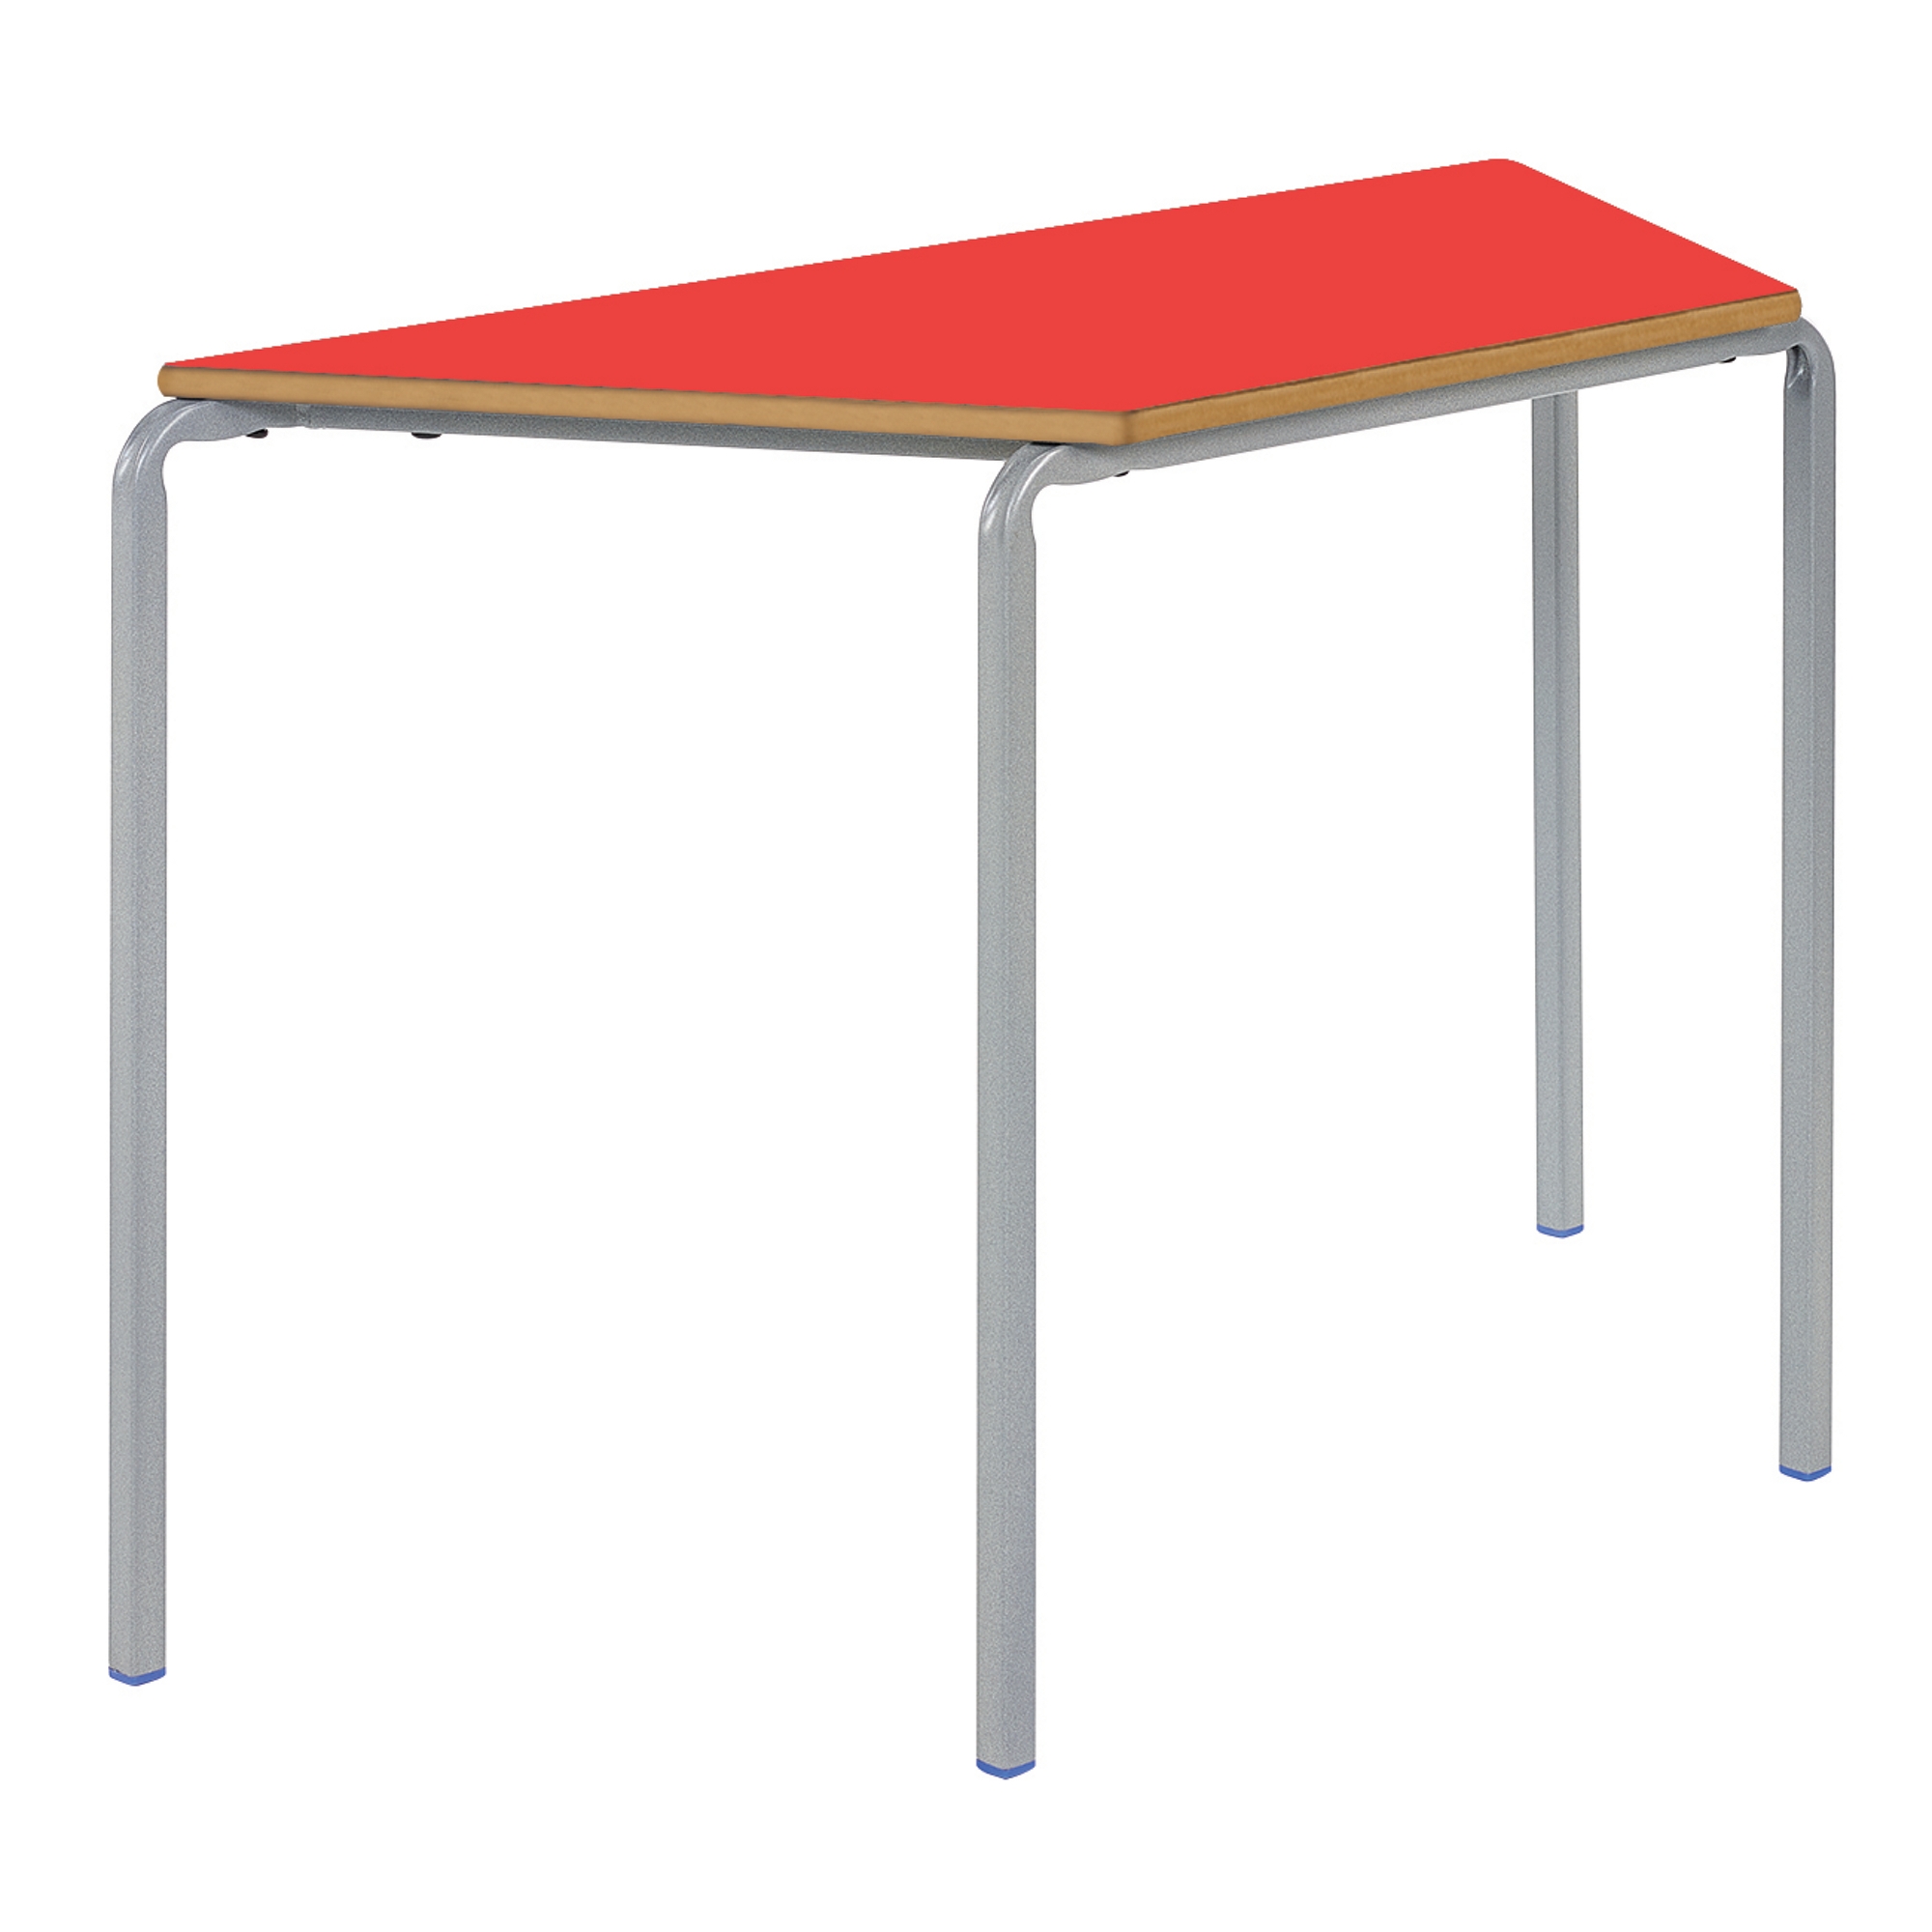 Classmates Trapezoidal Crushed Bent Classroom Table - 1100 x 550 x 760mm - Red